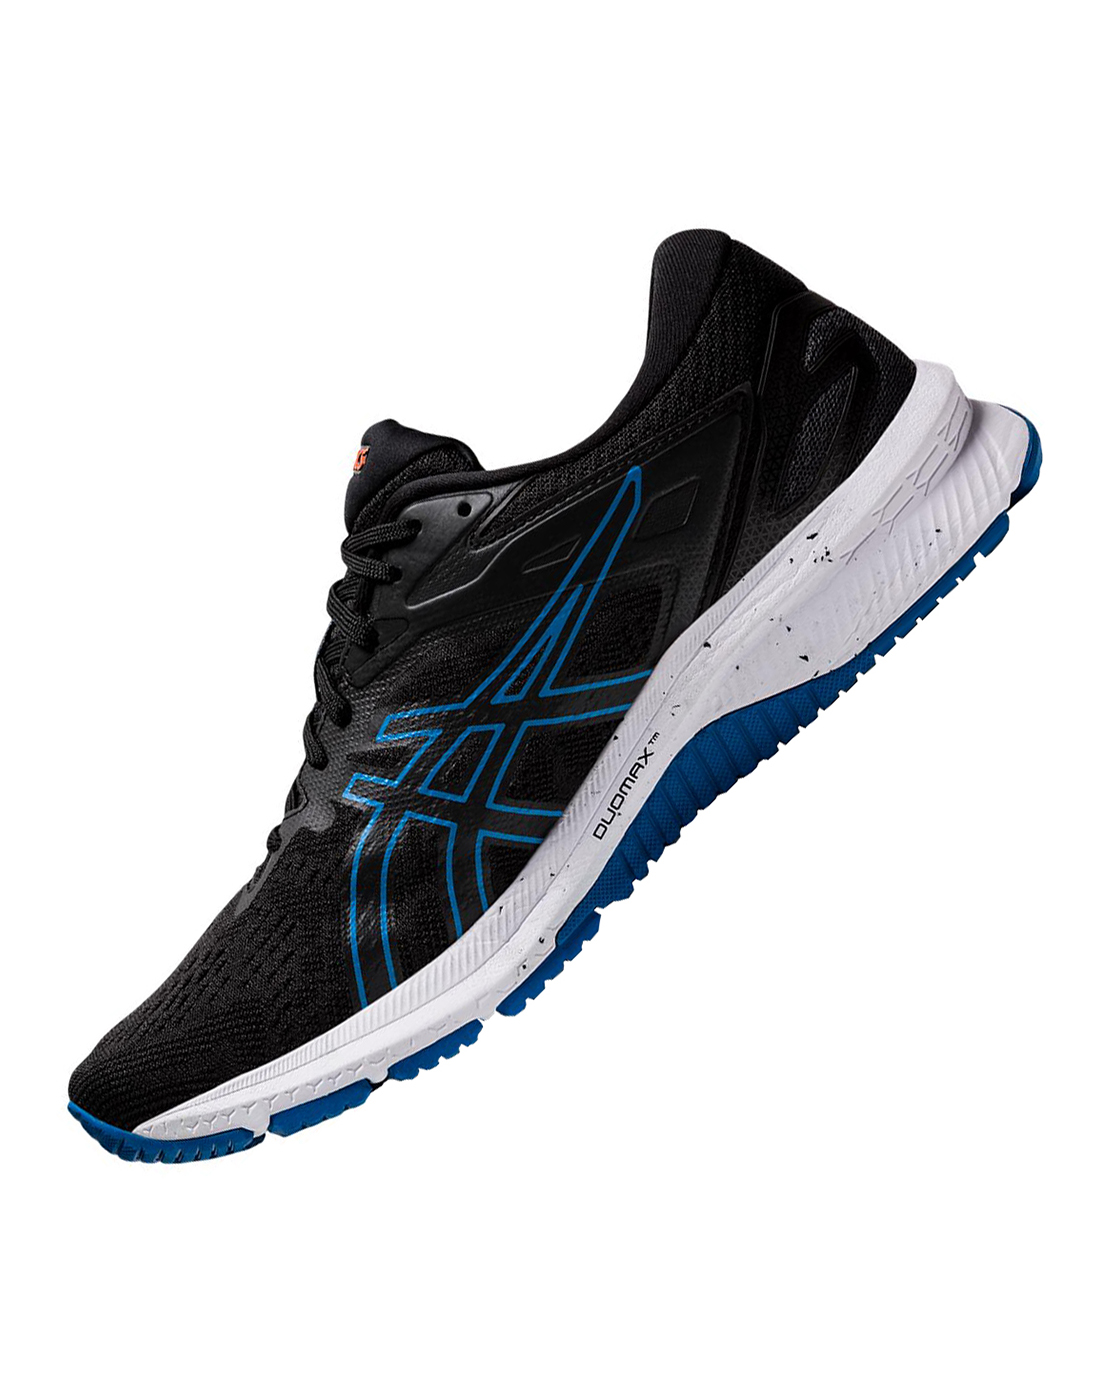 Asics Mens Gt-1000 10 - Black | Life Style Sports IE